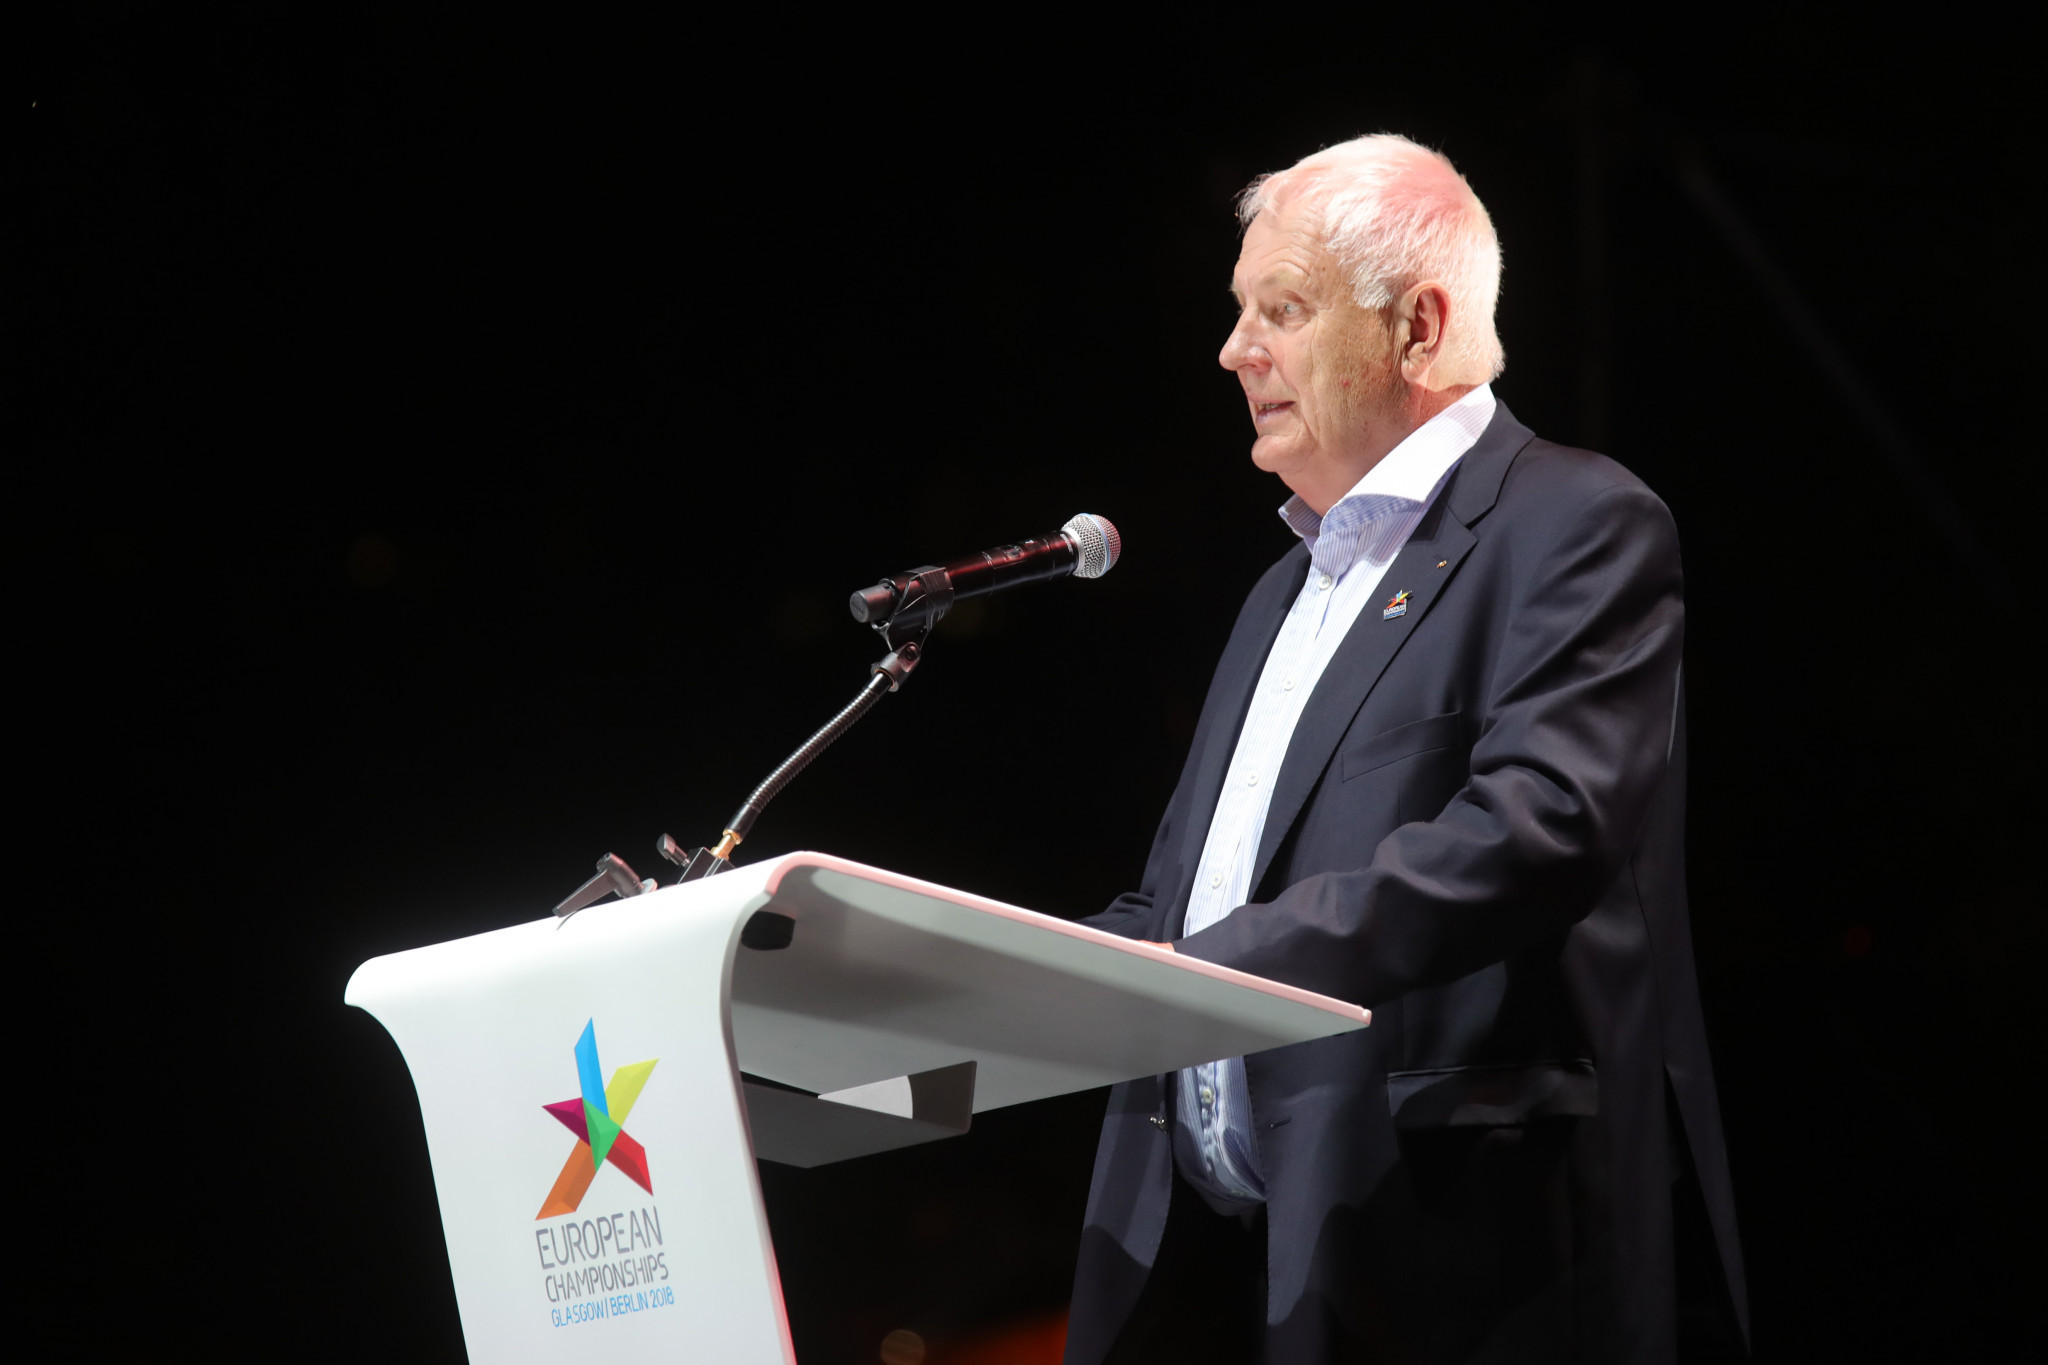 Hansen to stand unopposed for re-election as European Athletics President 